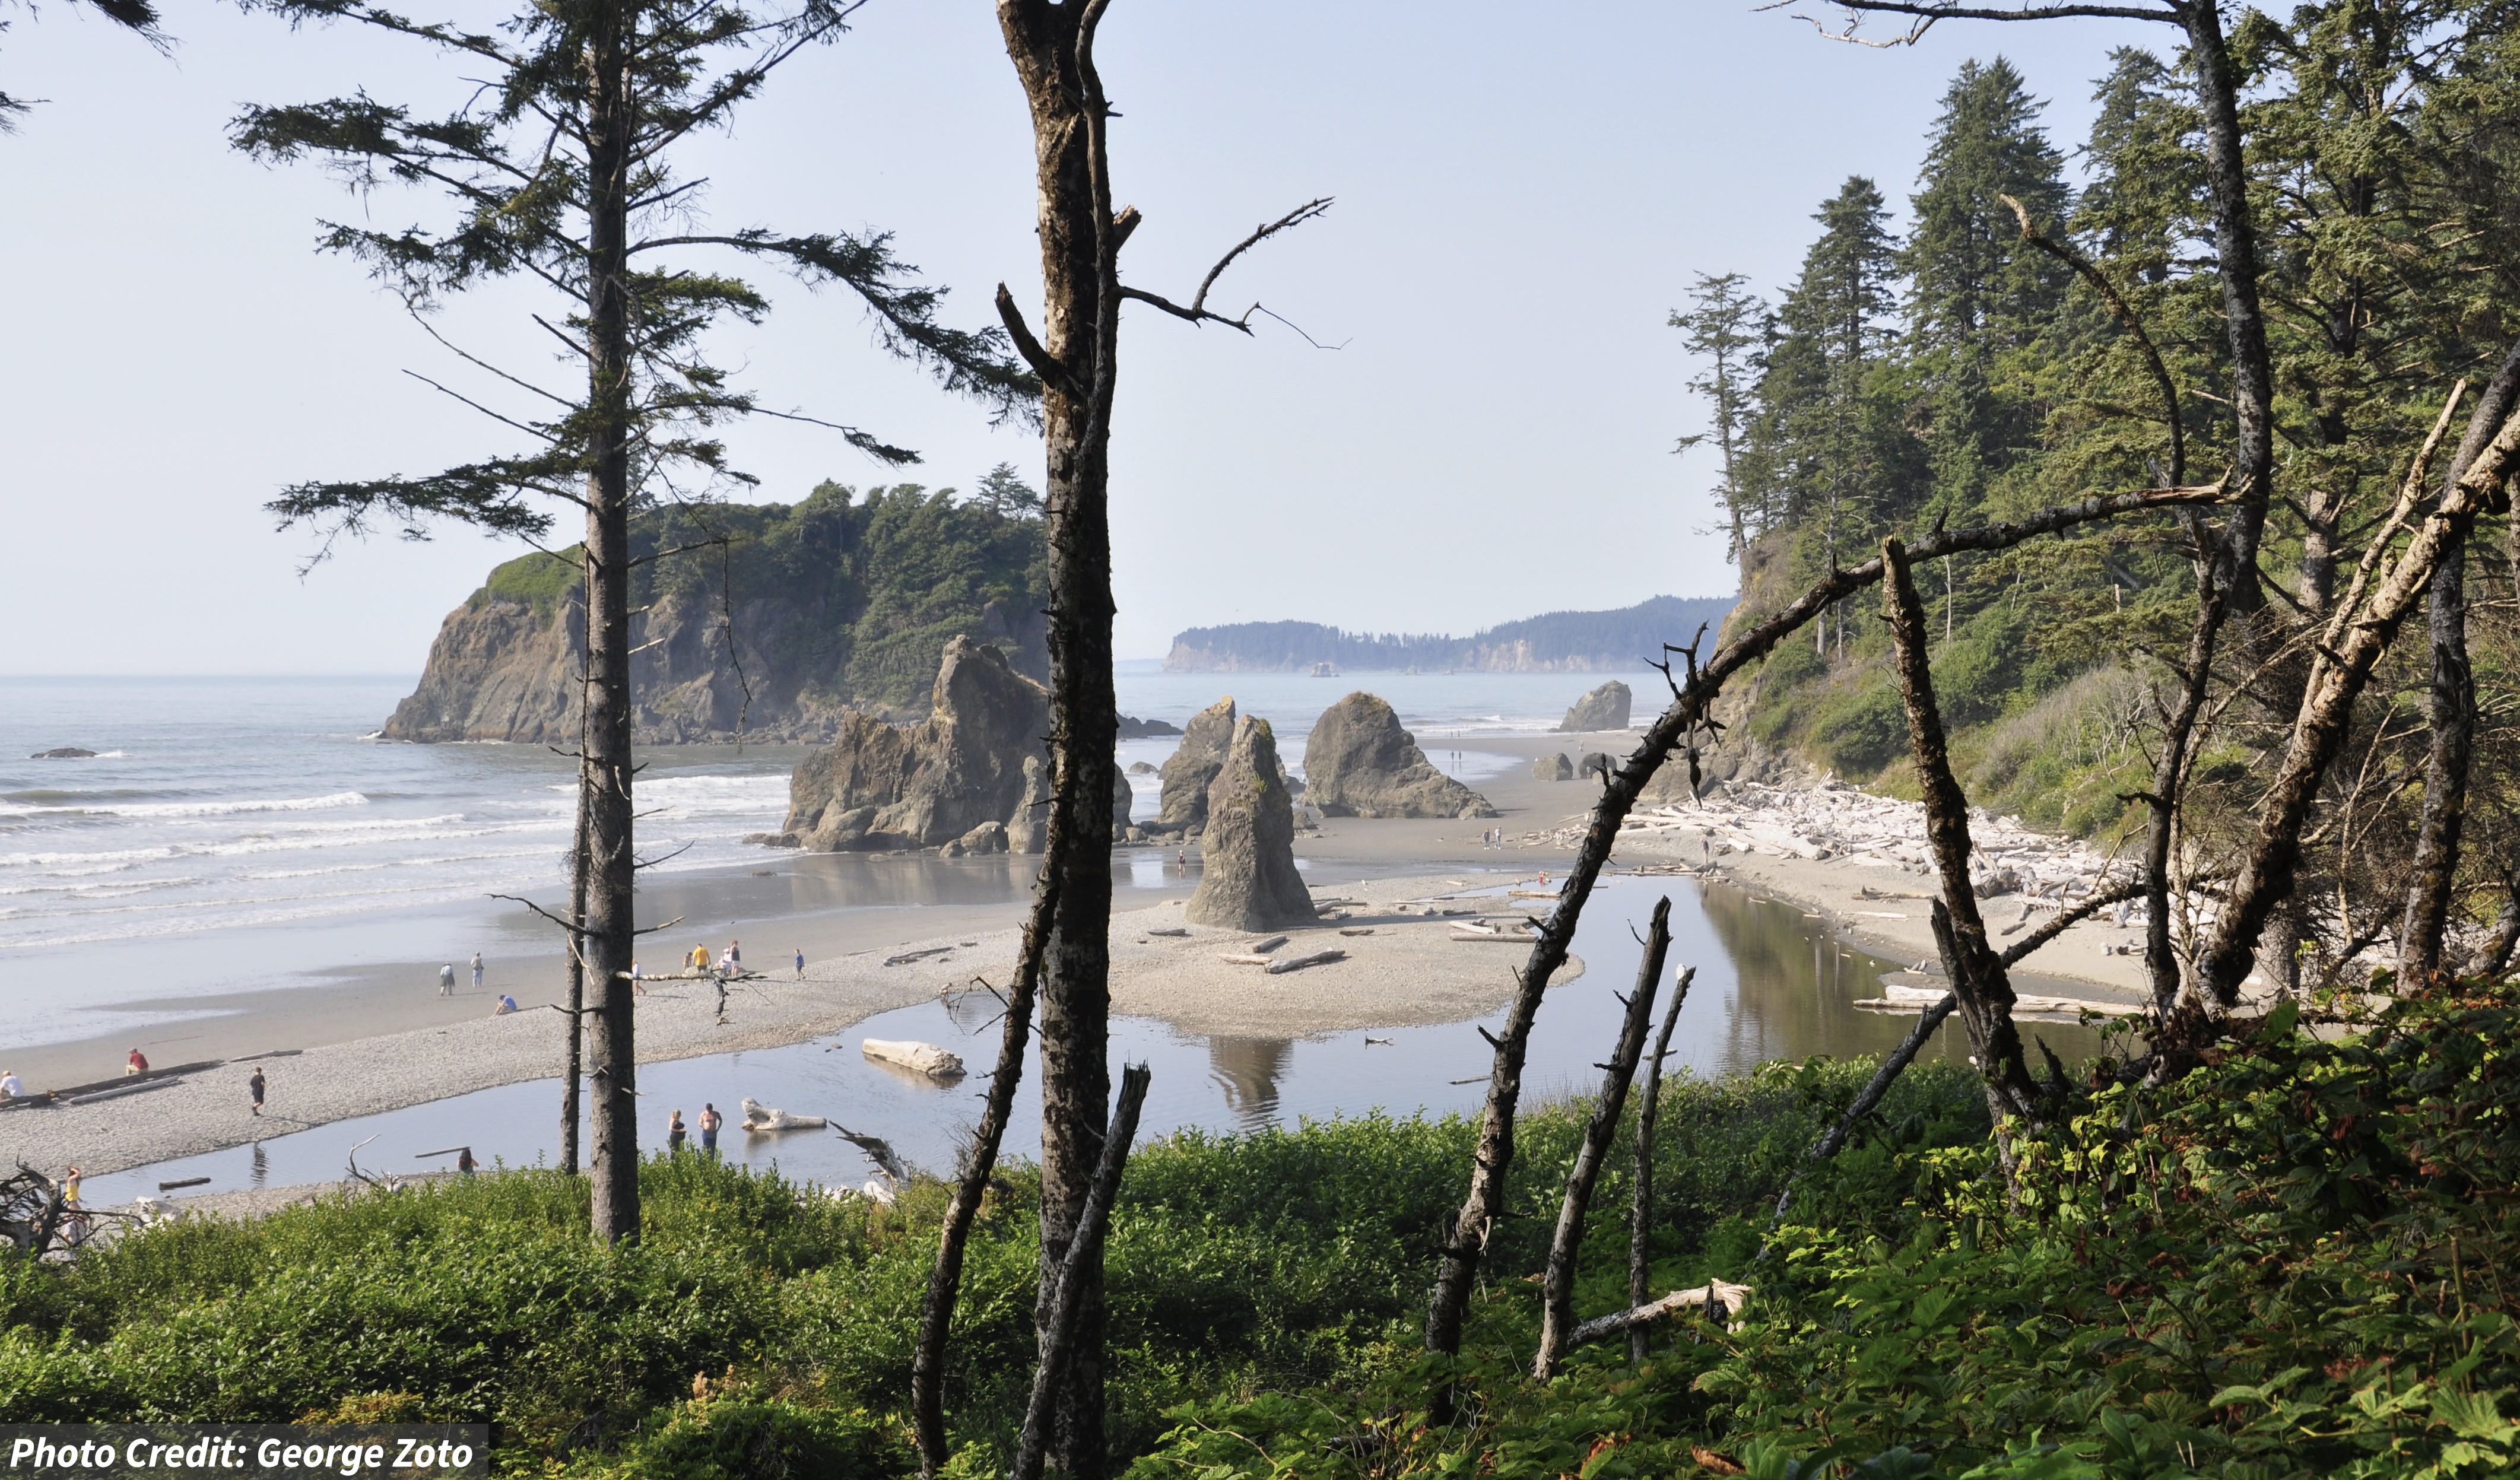 Trees in the foreground with rock formations and cliffs scattered on a beach.